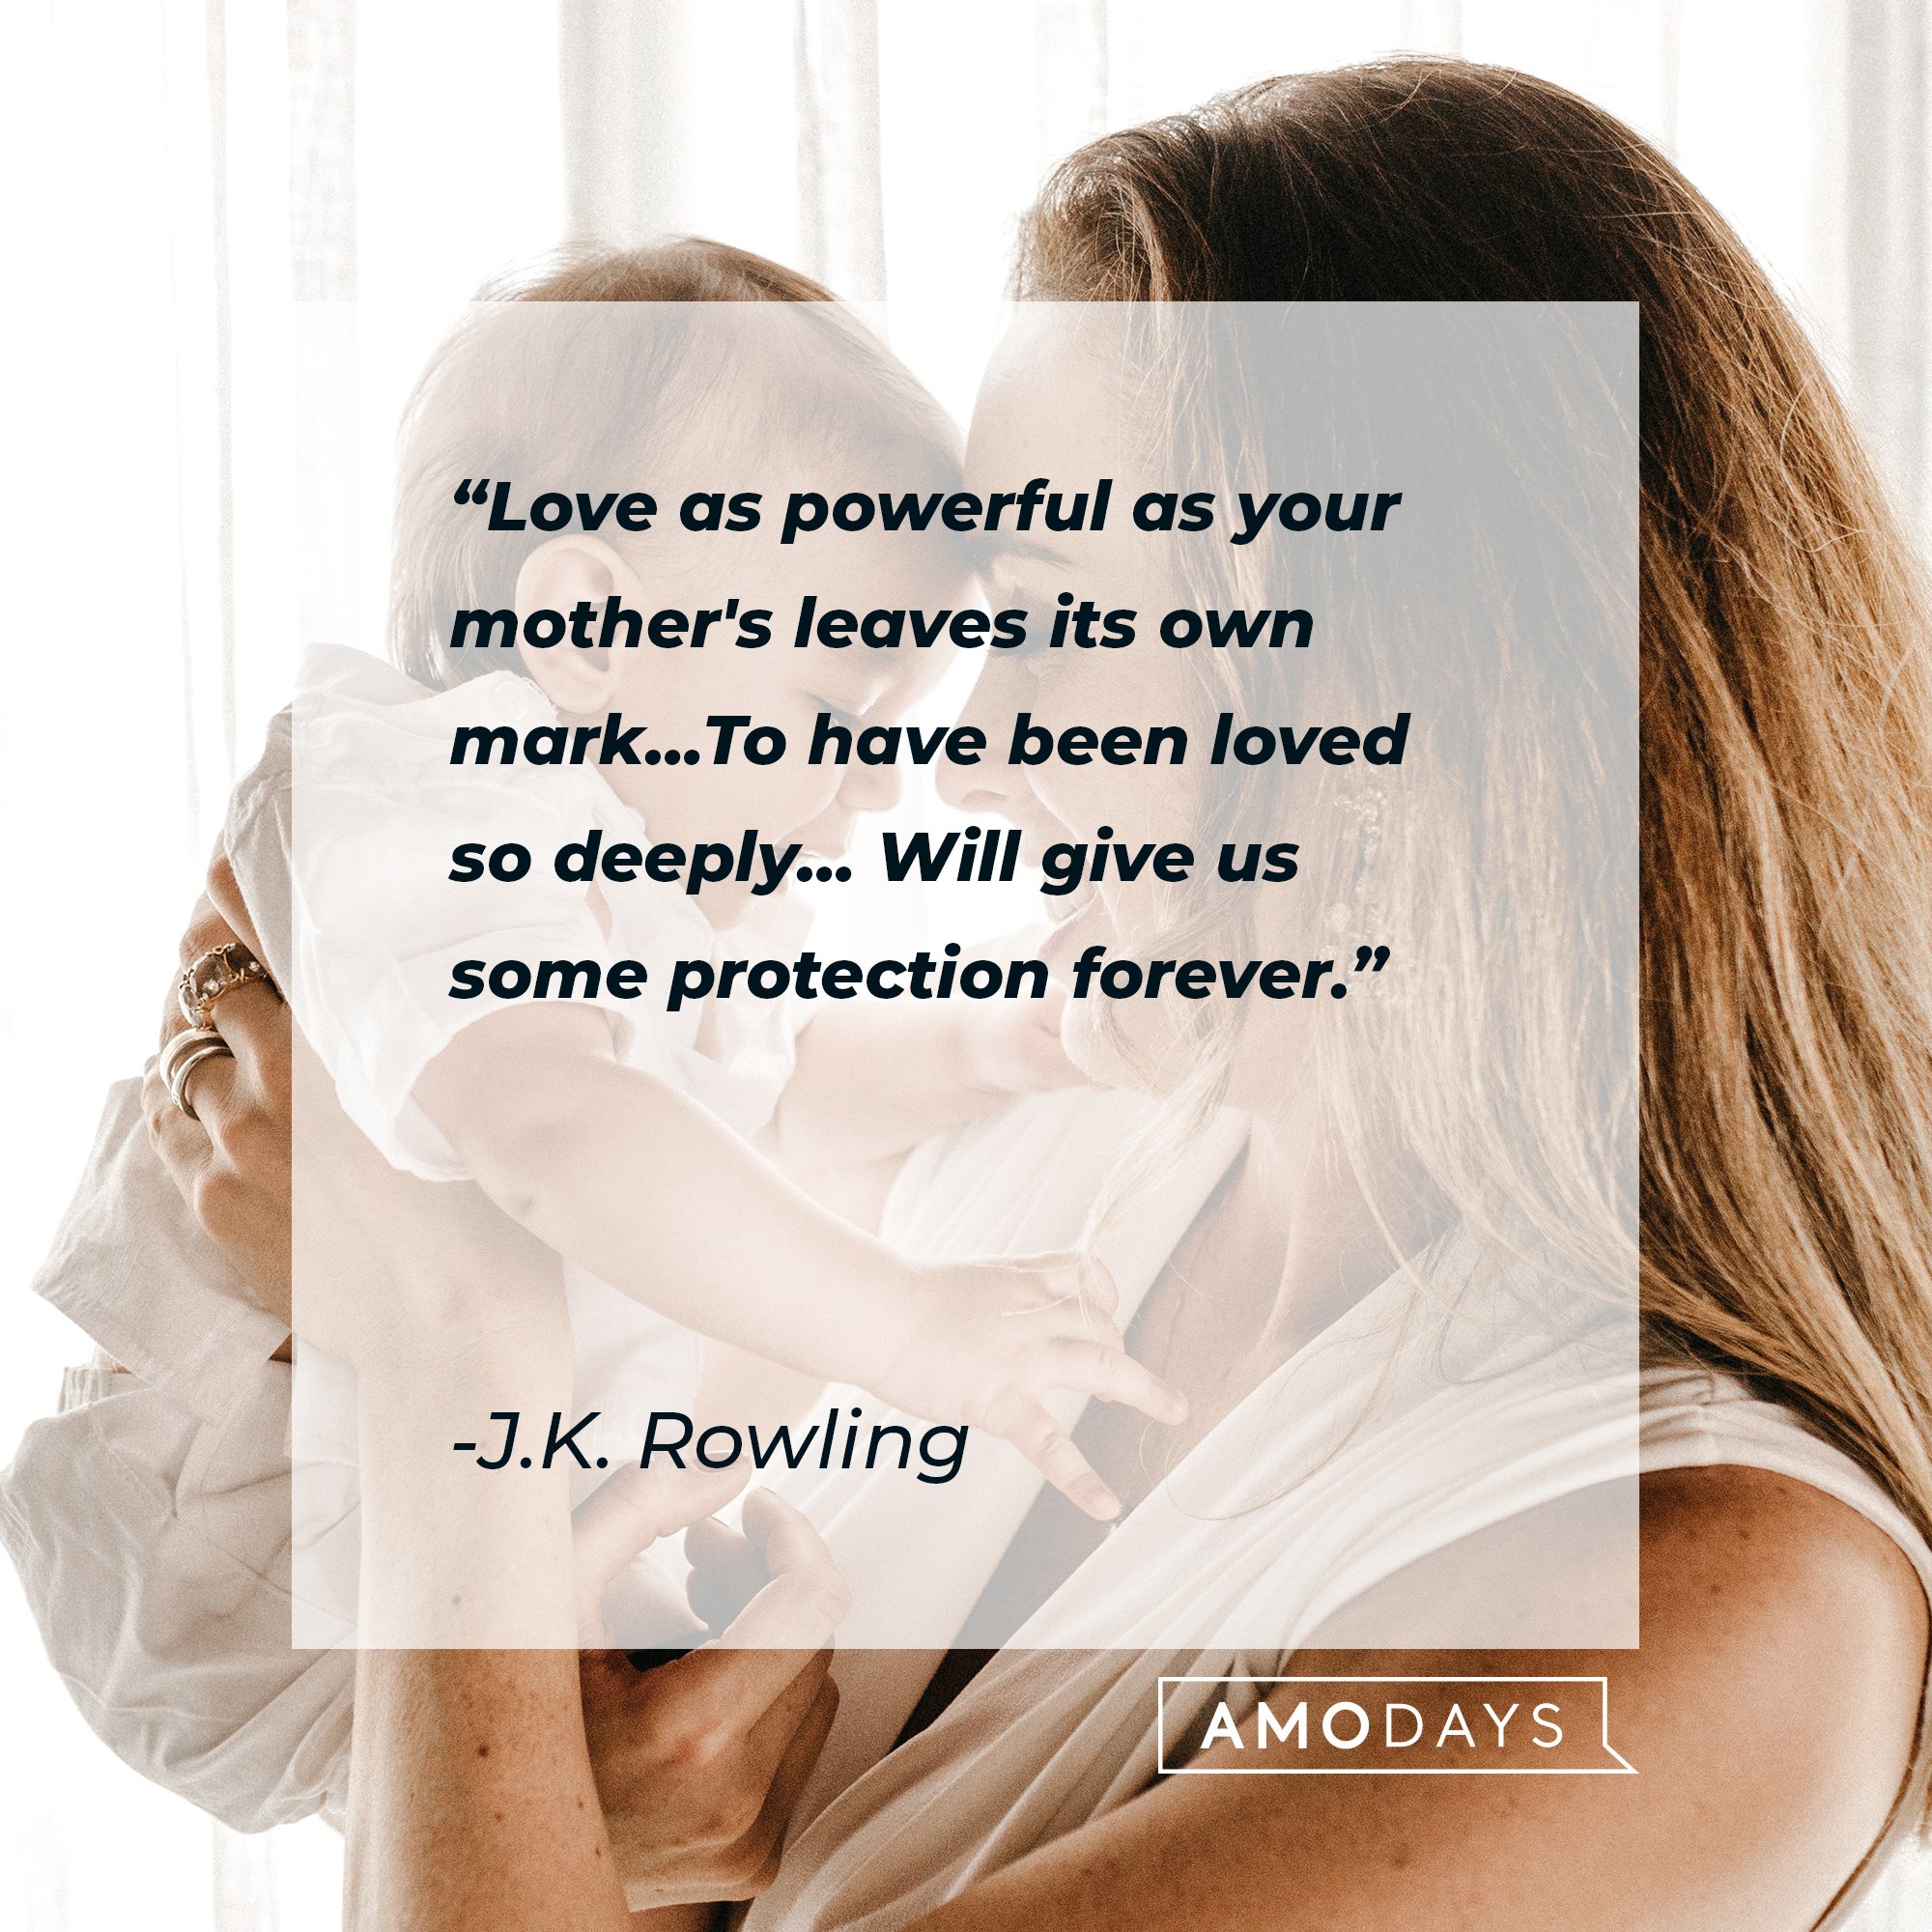 J.K. Rowling's quote: "Love as powerful as your mother's leaves its own mark…To have been loved so deeply… Will give us some protection forever." | Image: AmoDays